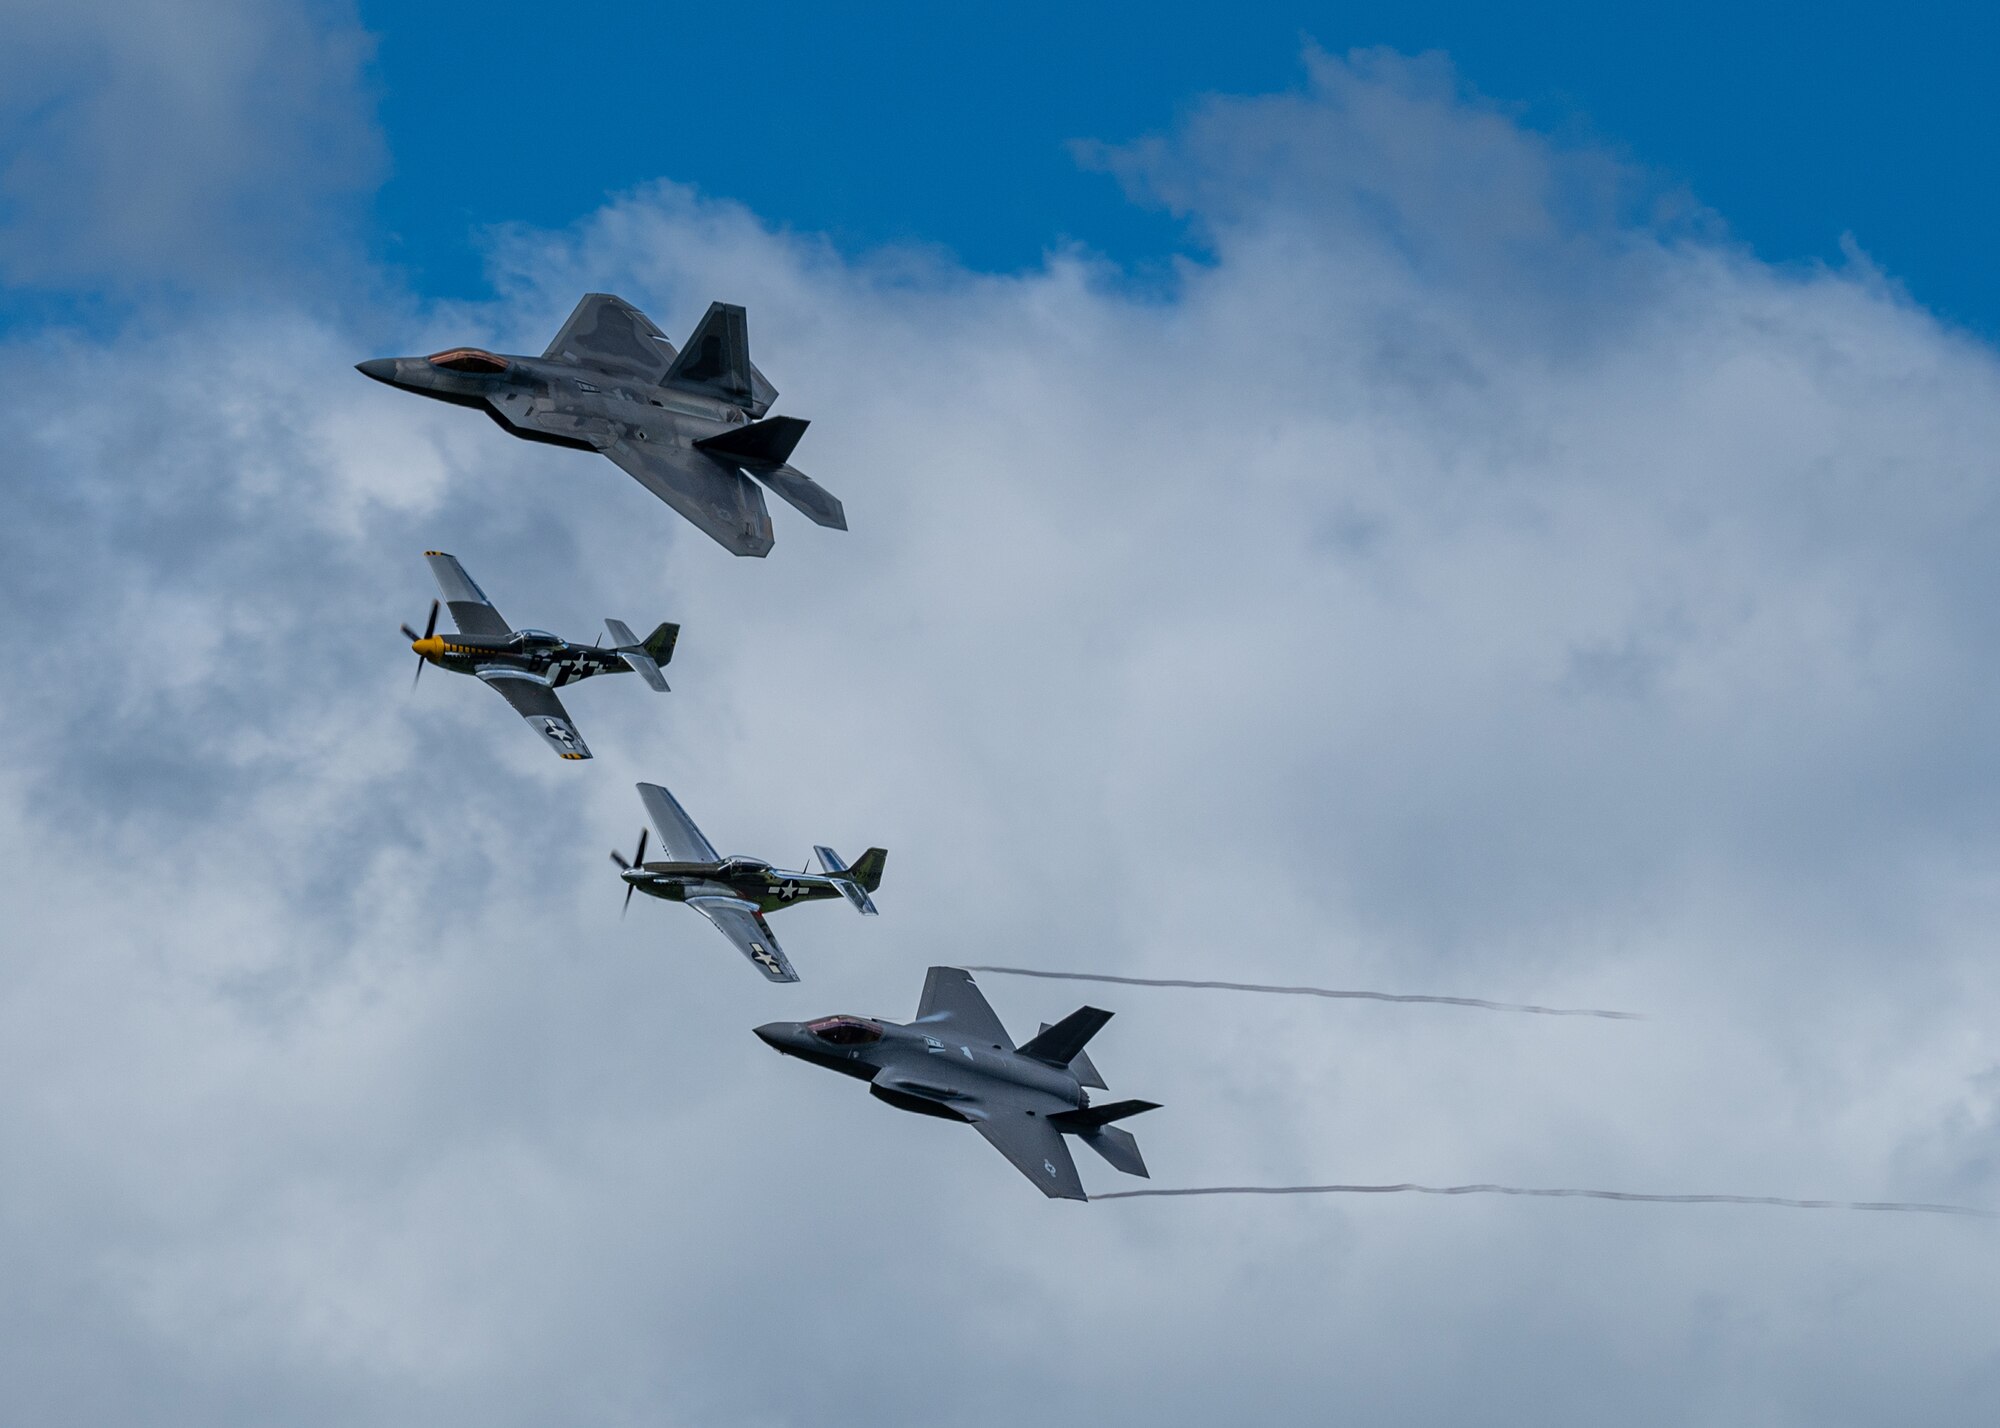 U.S. Air Force Capt. Kristin “Beo” Wolfe, F-35 Demonstration Team pilot, flies alongside Maj. Joshua “Cabo” Gunderson, F-22 Demonstration Team pilot, and two P-51 Mustangs as part of a heritage flight formation Aug. 30, 2020, Orange County Airport, NY. The heritage flight was flown as part of the 2020 New York Air Show, which was held in a drive-in format. (U.S. Air Force photo by Capt. Kip Sumner)